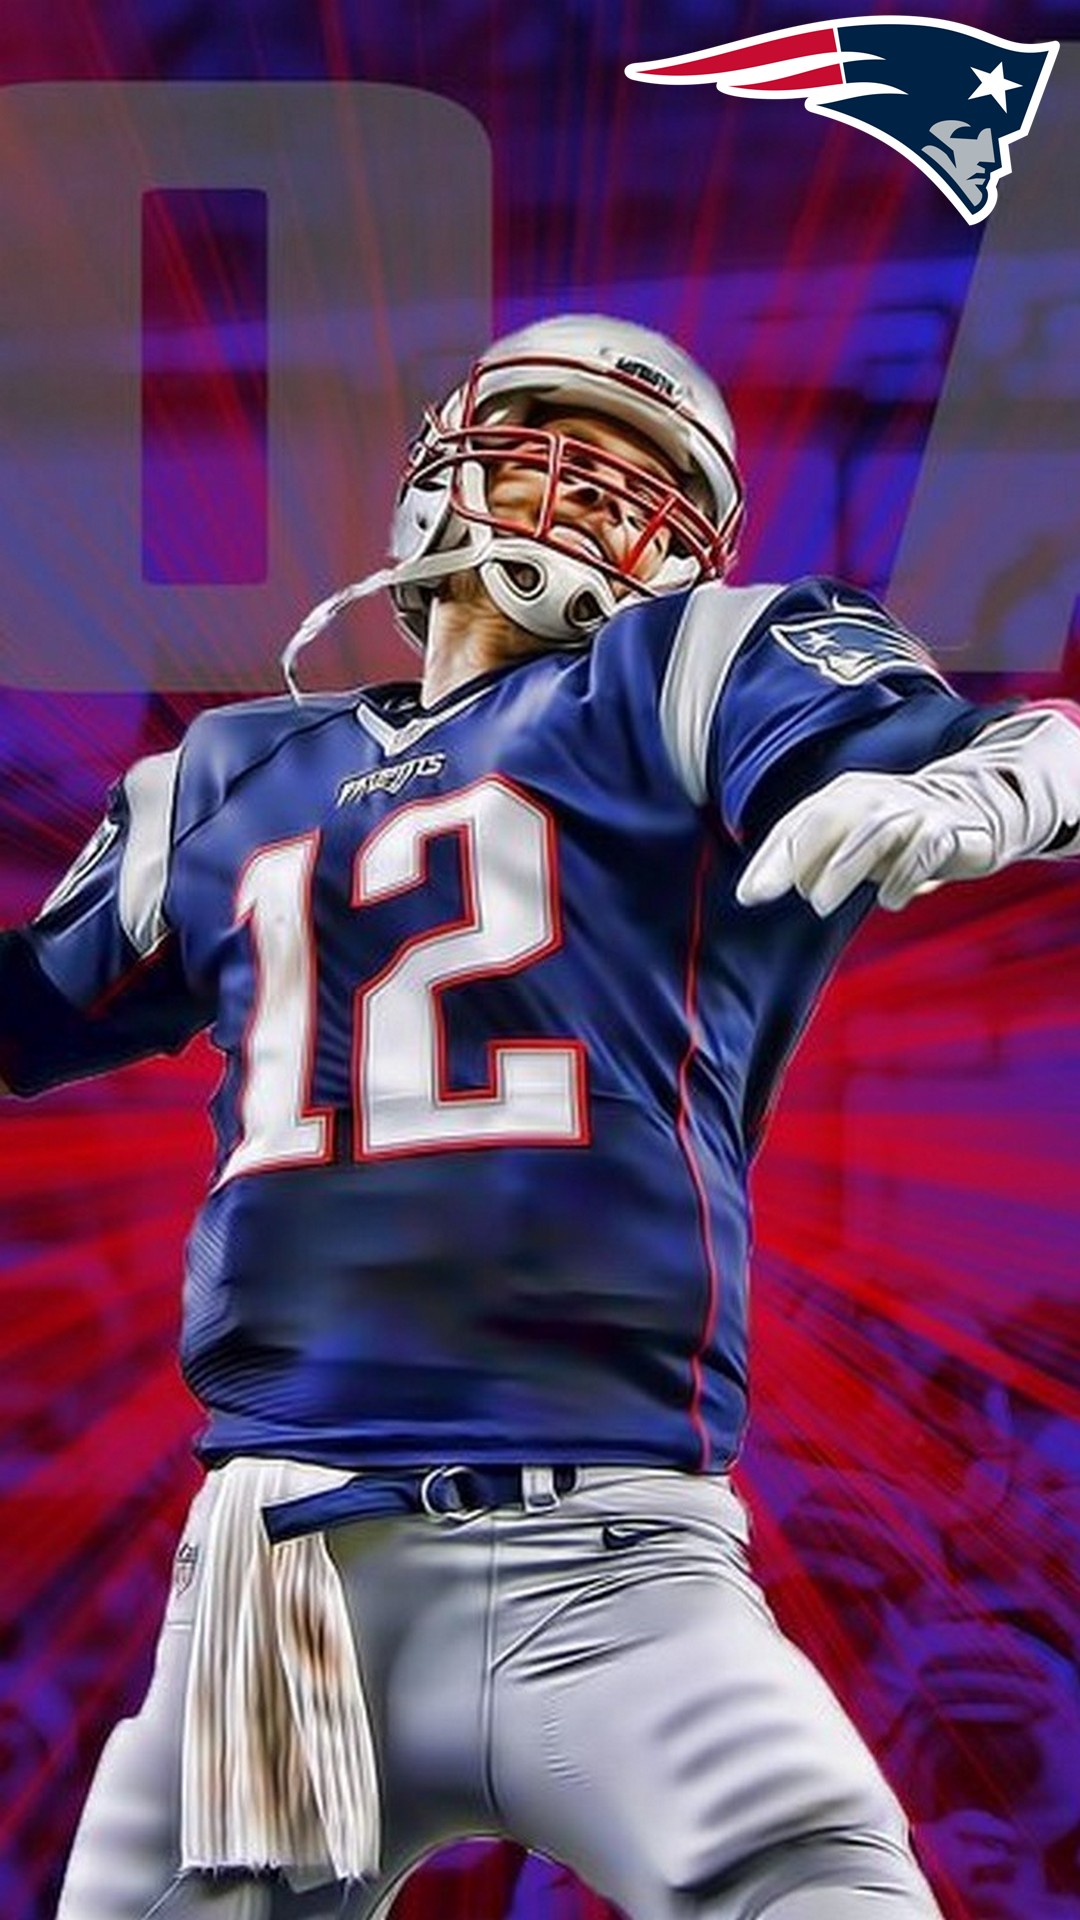 Tom Brady Goat HD Wallpaper For iPhone With Resolution 1080X1920 pixel. You can make this wallpaper for your Mac or Windows Desktop Background, iPhone, Android or Tablet and another Smartphone device for free